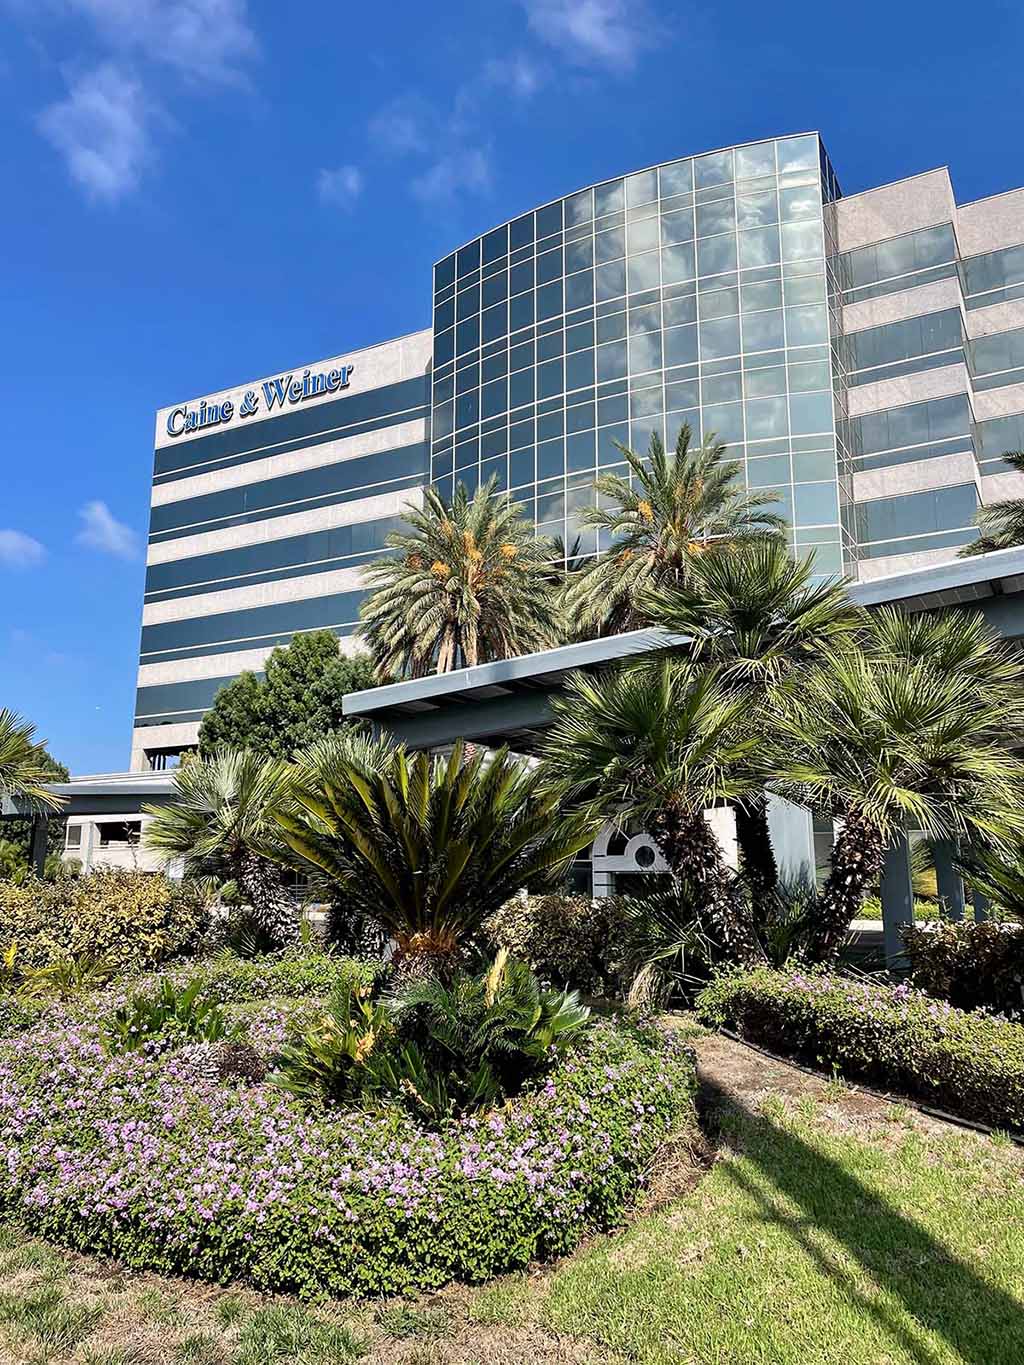 Southern California Multi-Specialty Center serves patients from Van Nuys & Valley Glen